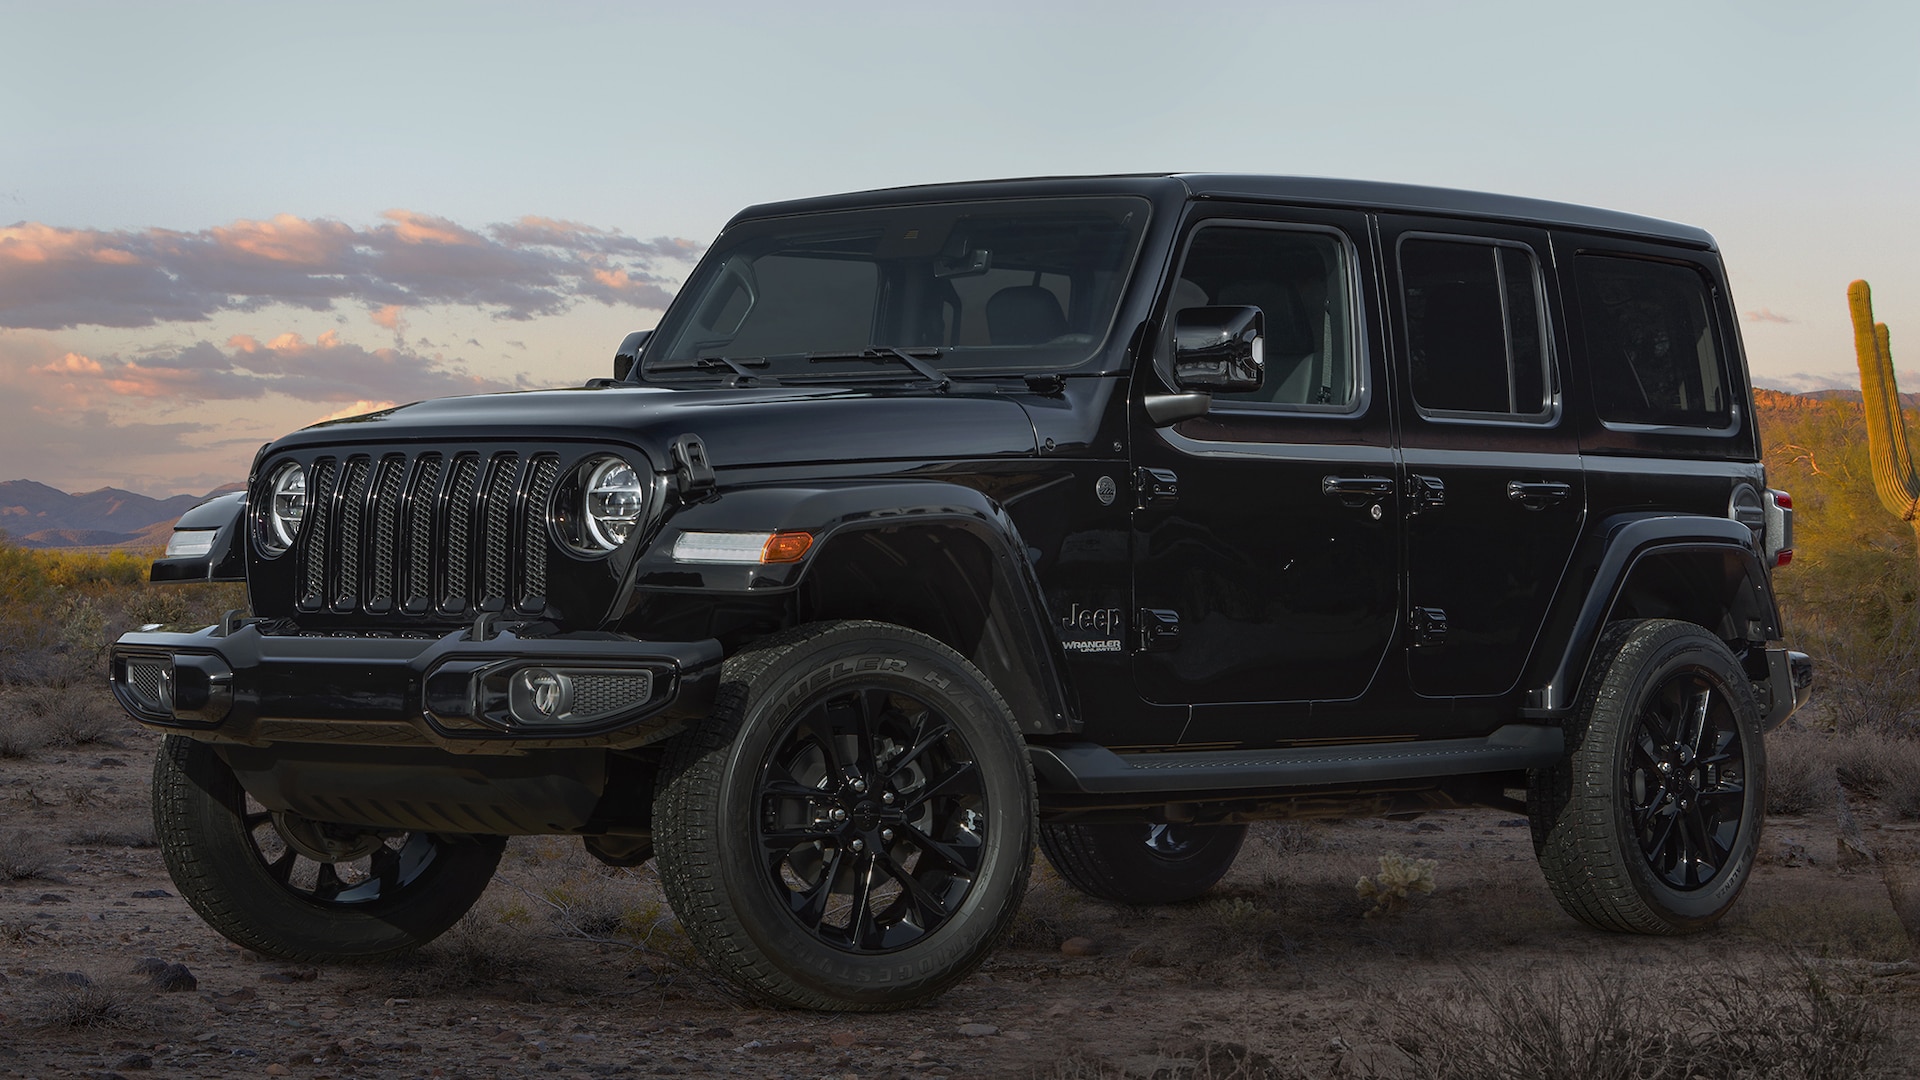 2021 Jeep Wrangler Gets More Features as New Ford Bronco Looms